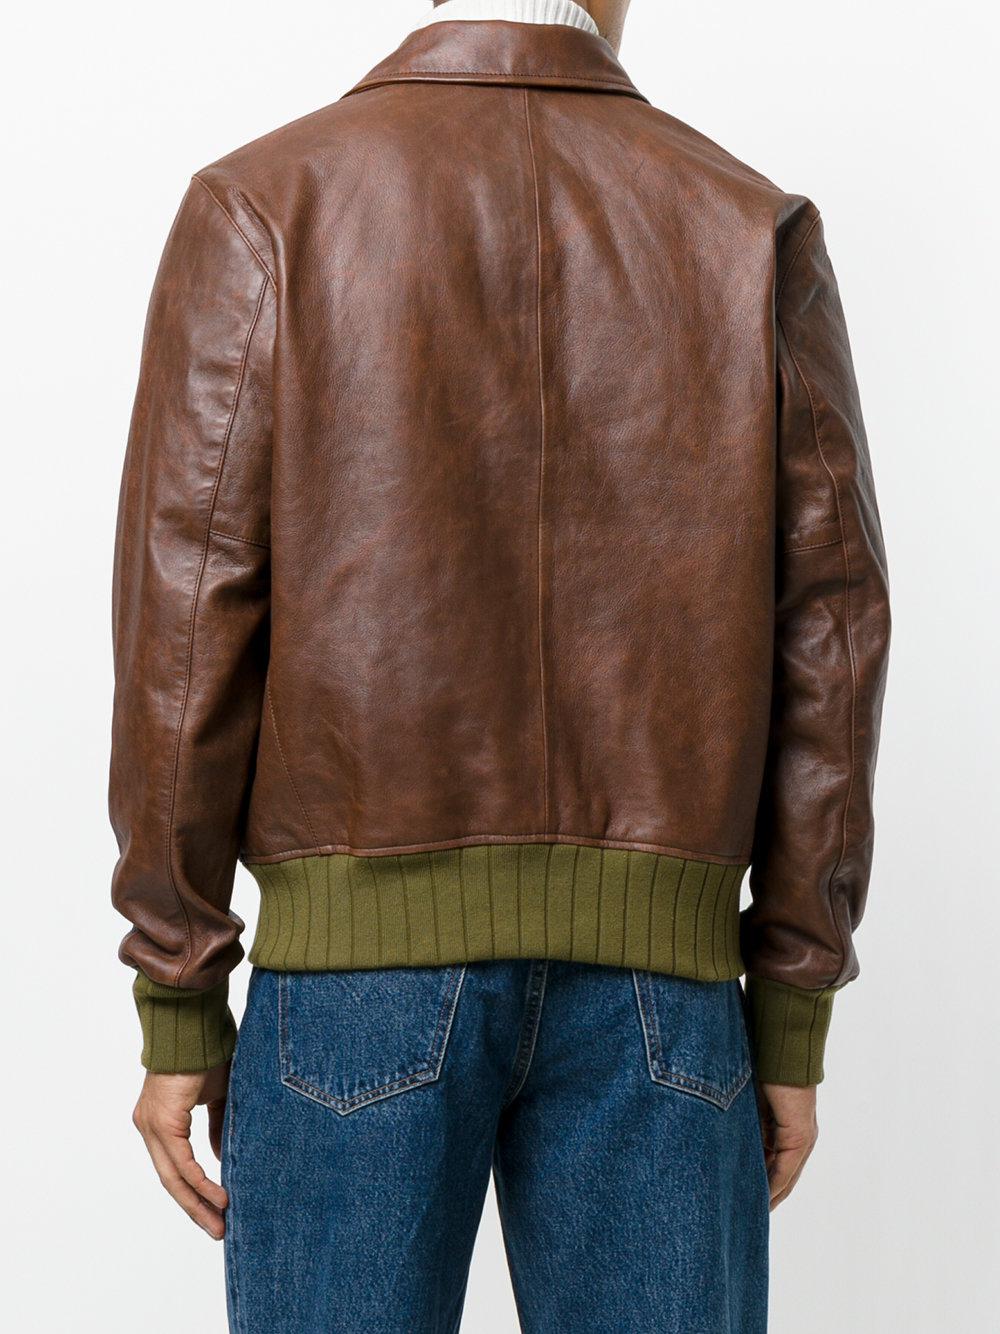 Levi's Elasticated Waist Leather Jacket in Brown for Men - Lyst